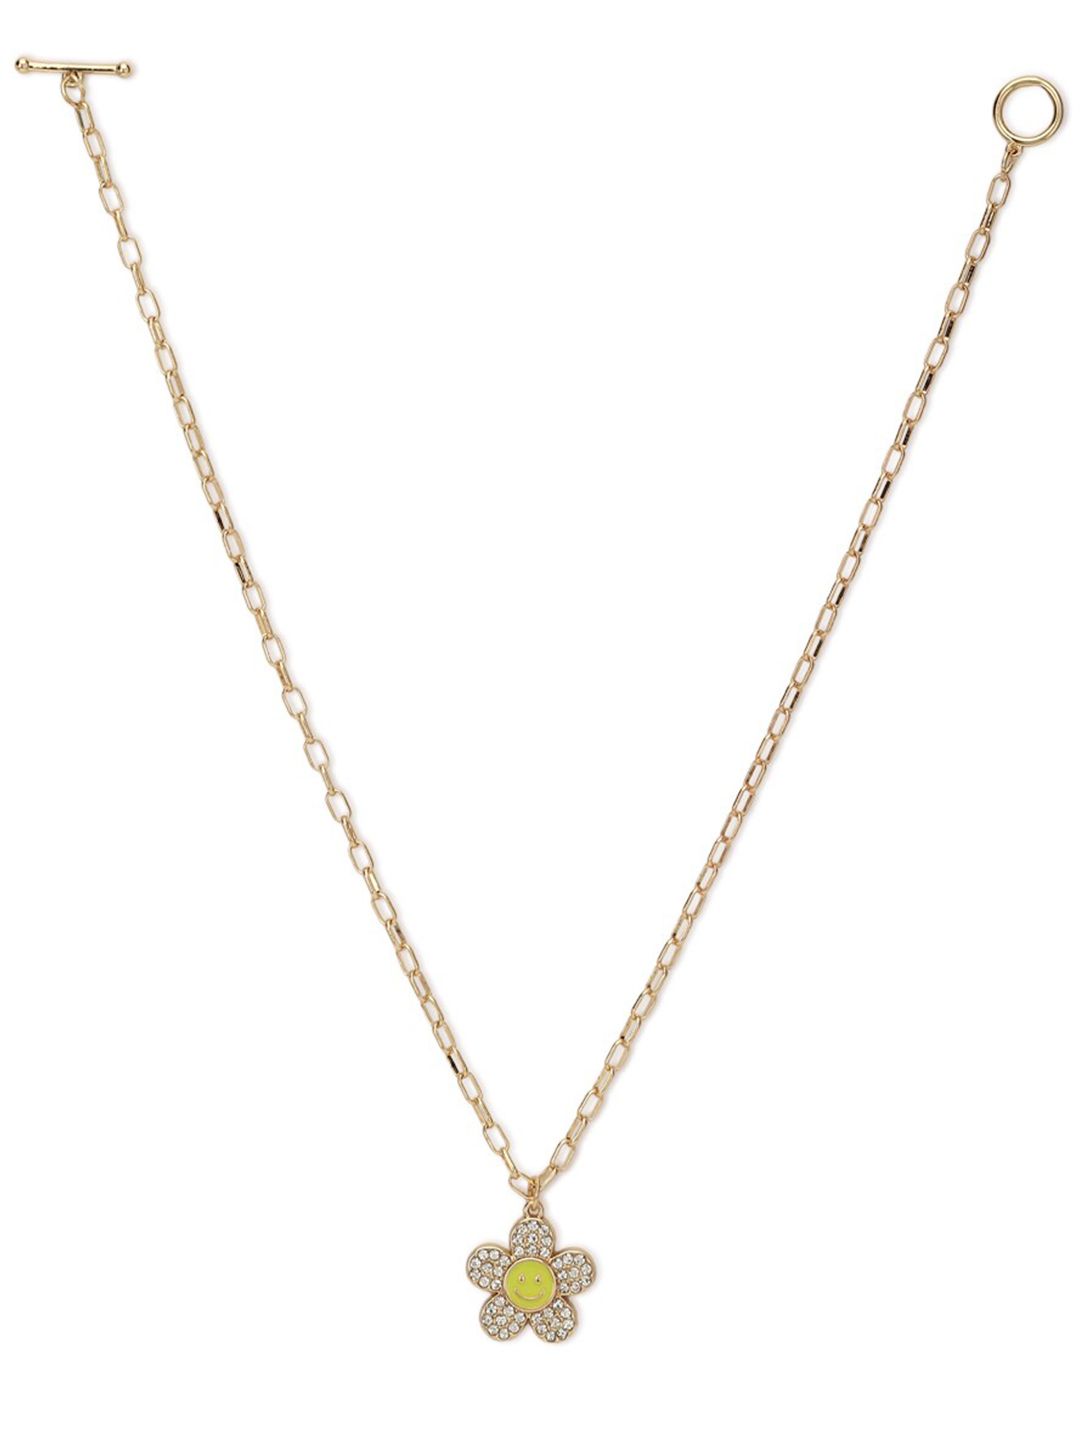 FOREVER 21 Gold-Toned & White Necklace Price in India